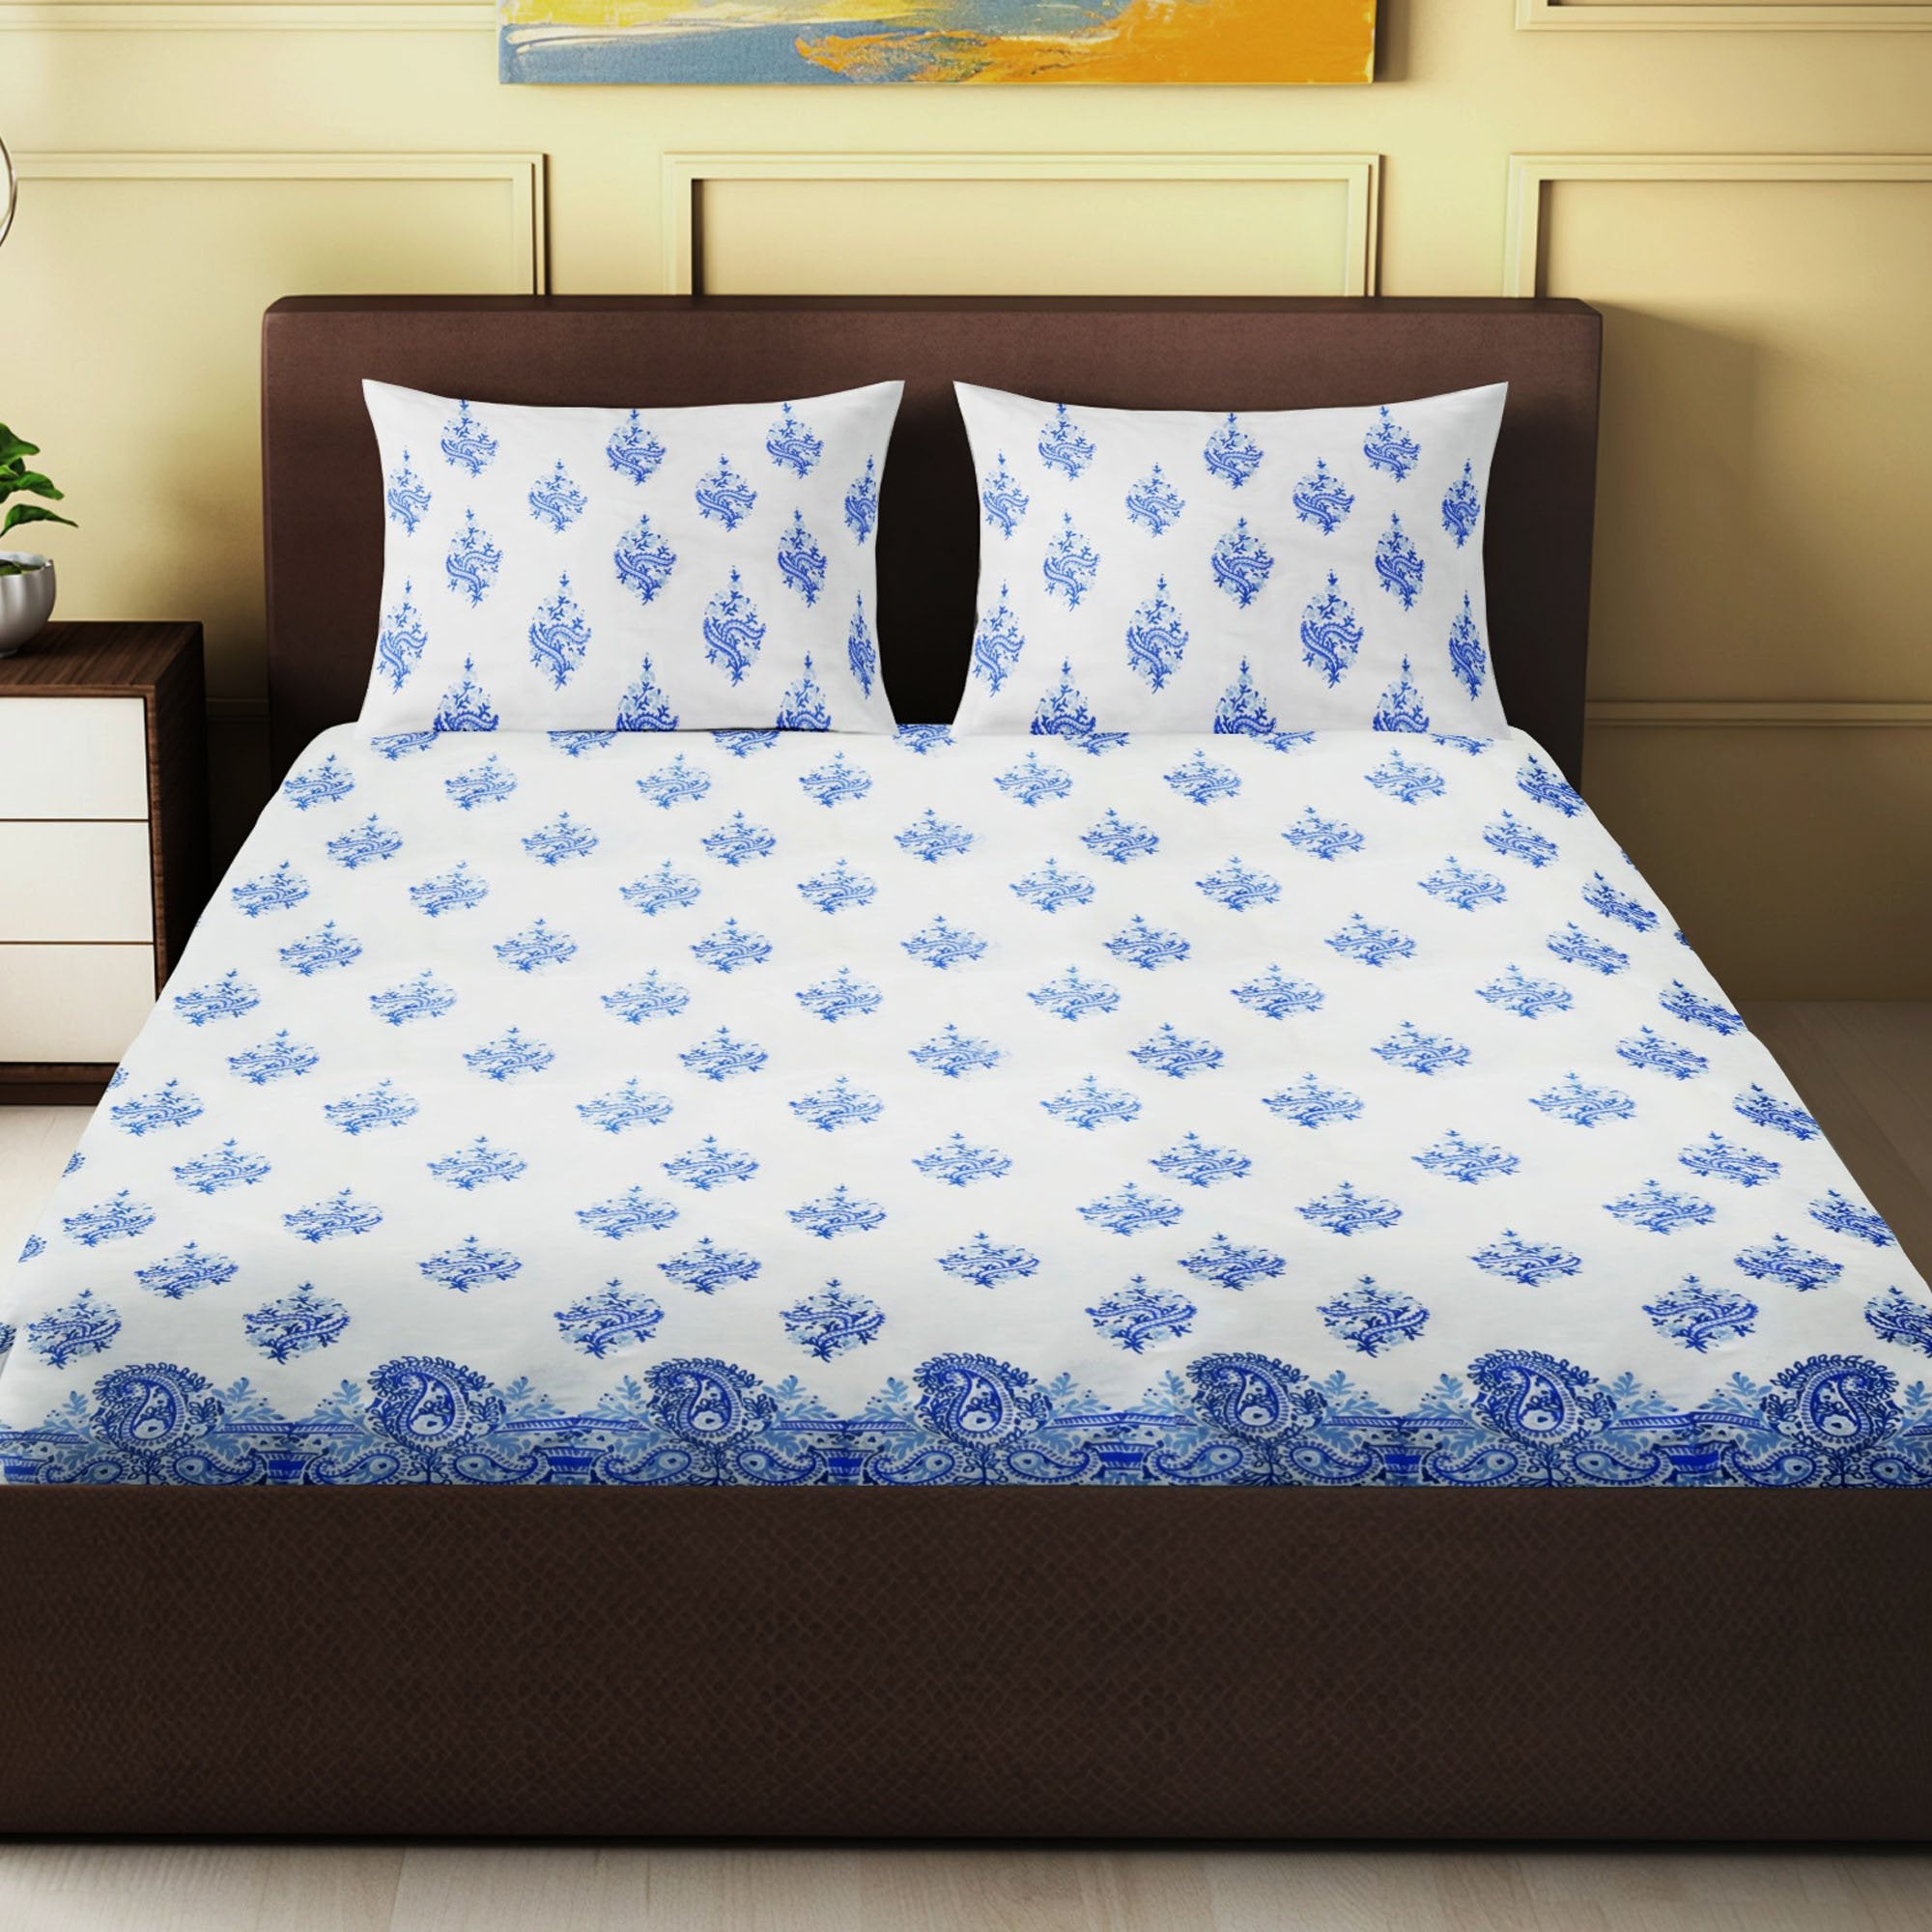 100% Handmade  Paisley pattern sanganeri Block Print King Size Bedsheets comes  with 2 Pillow covers